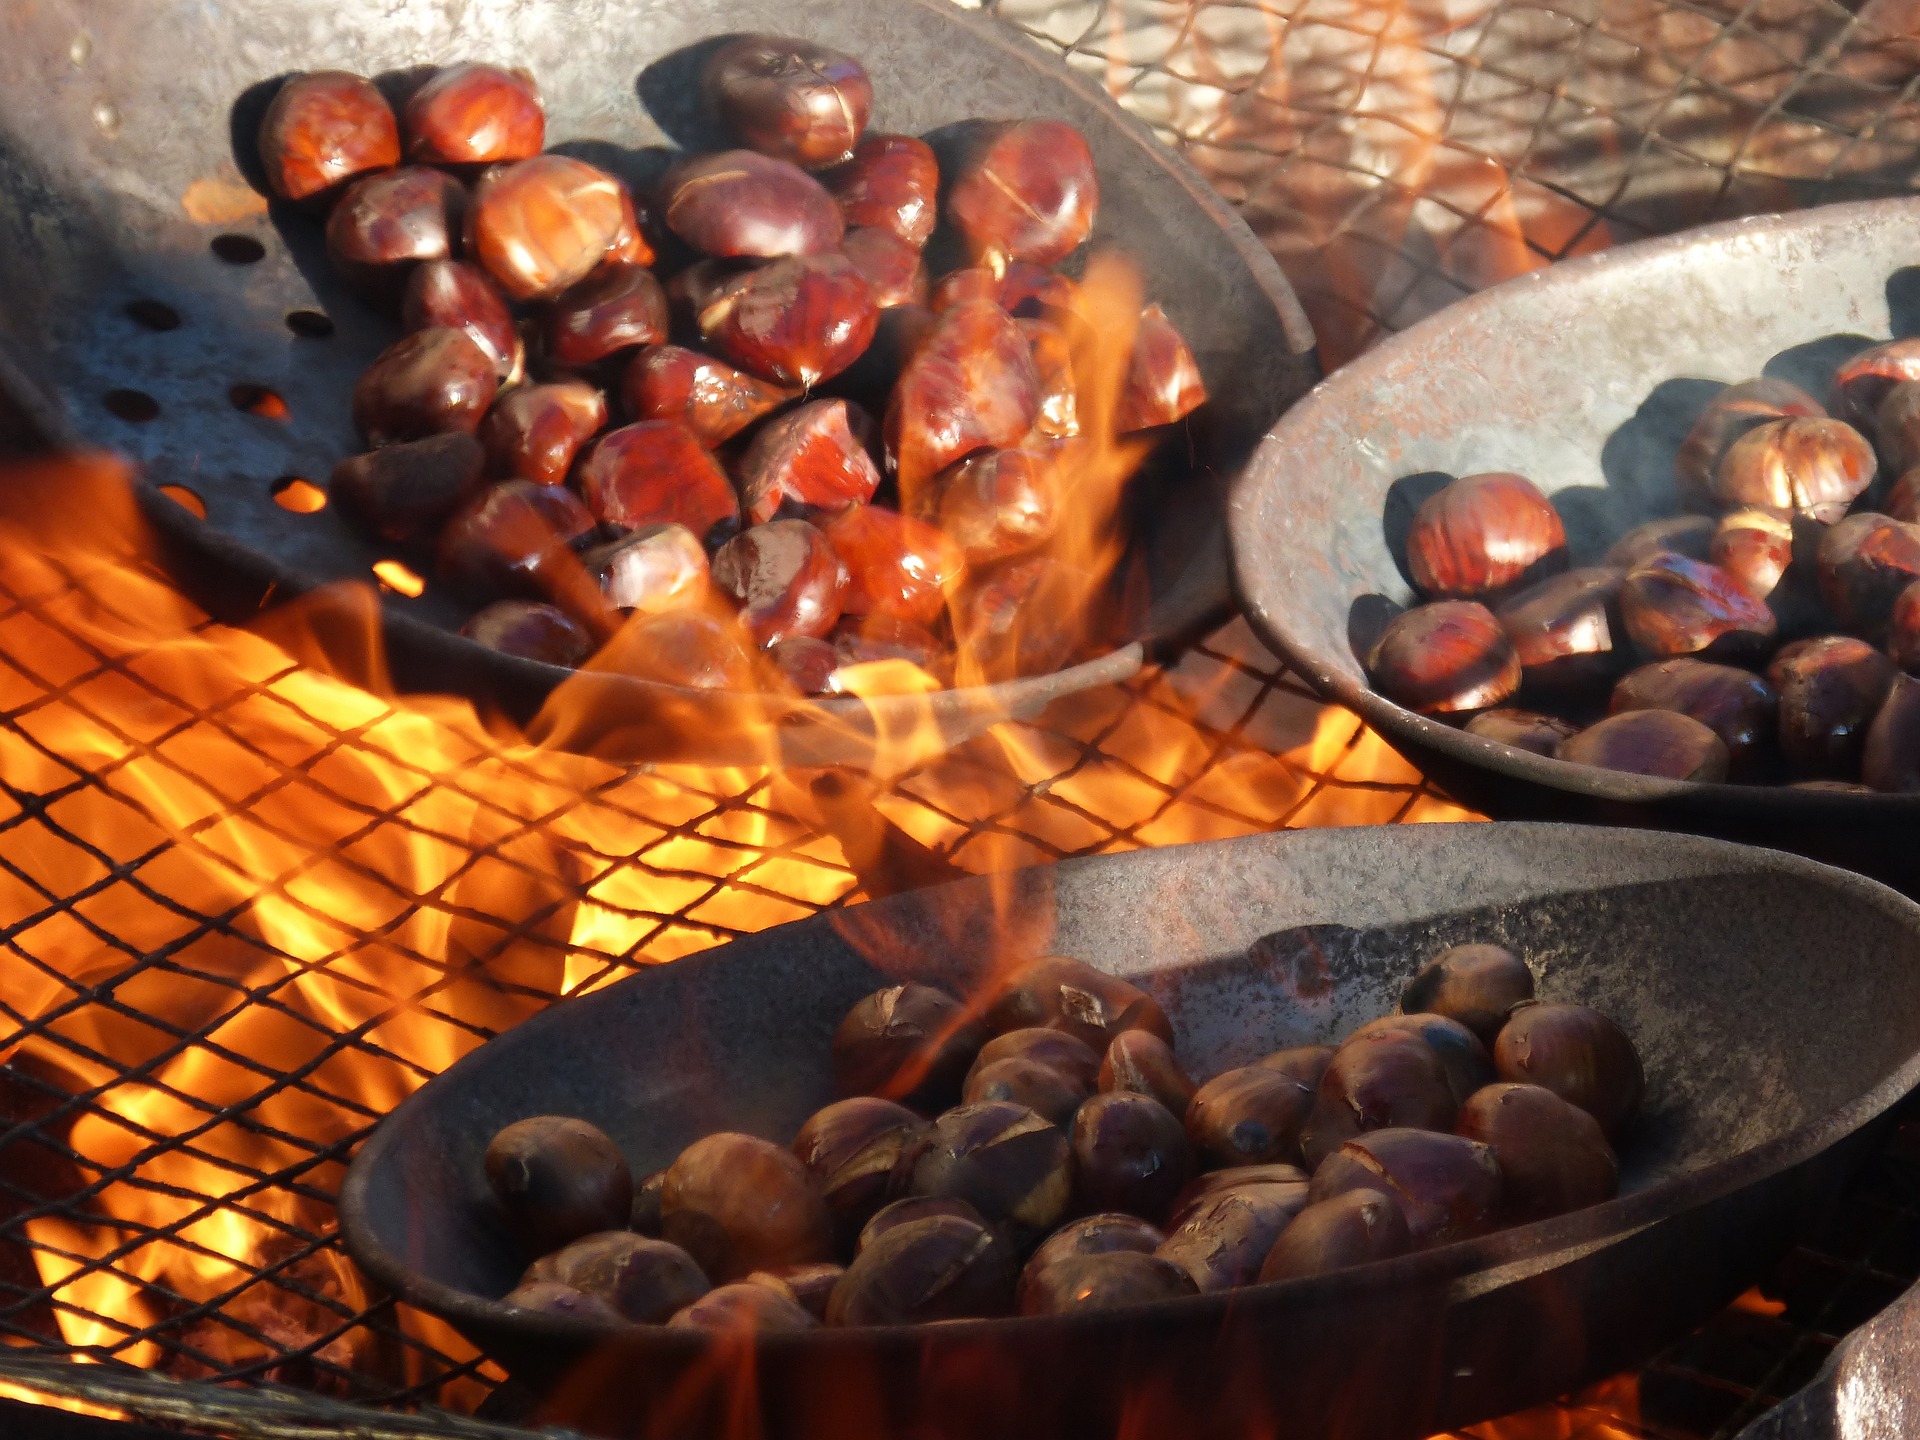 Tips for freezing chestnuts